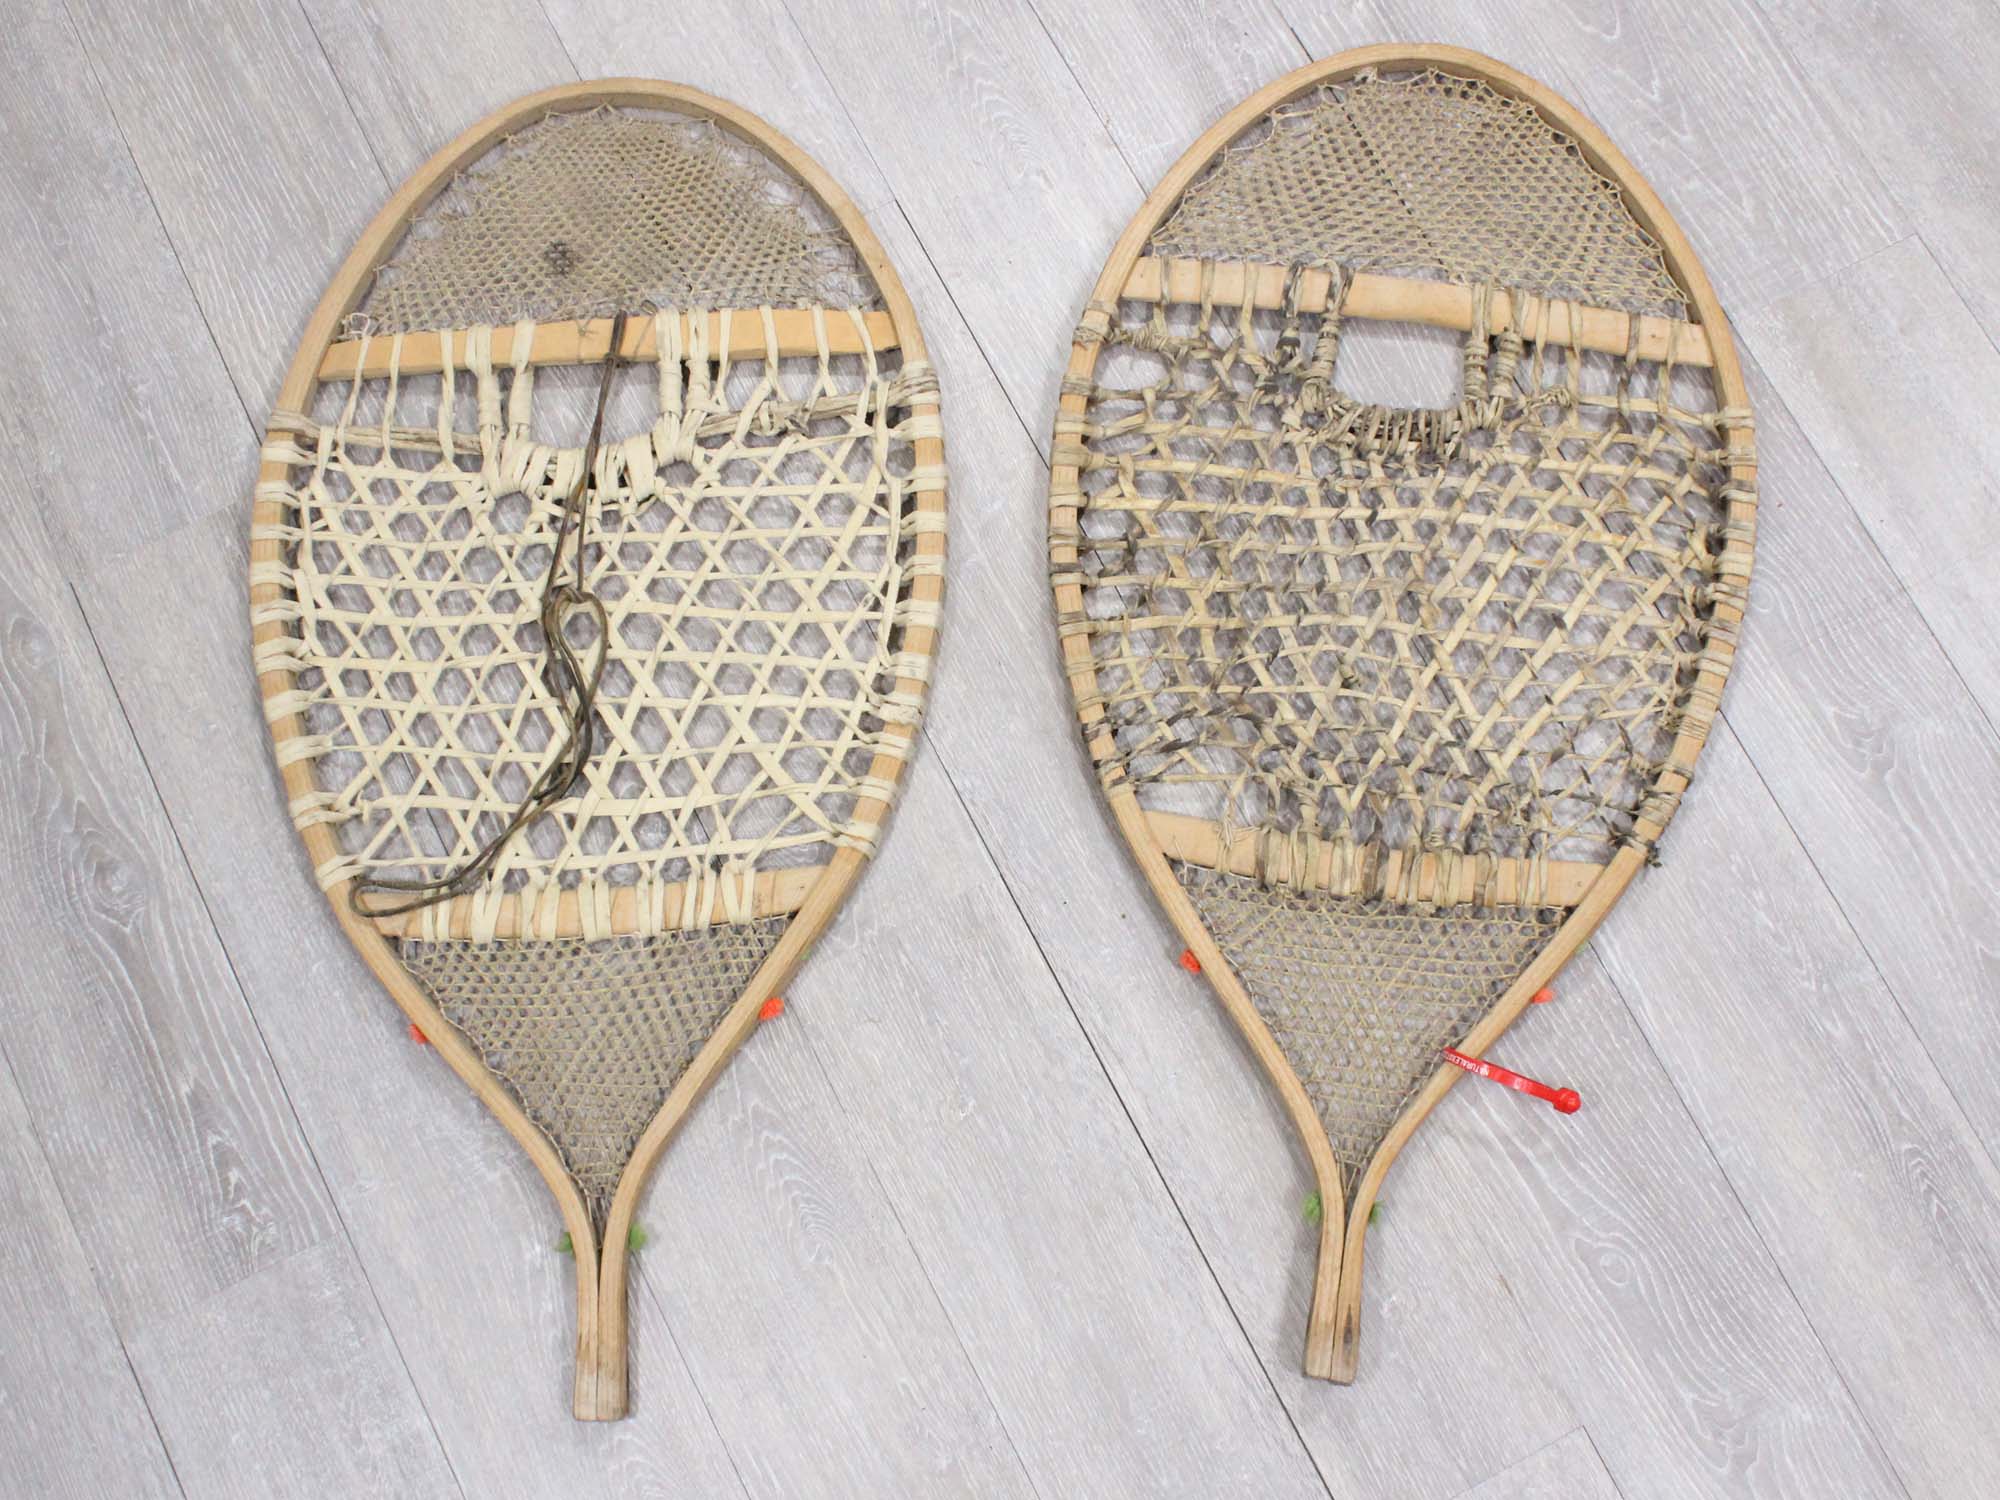 Used Snowshoes: Good Quality: Gallery Item 